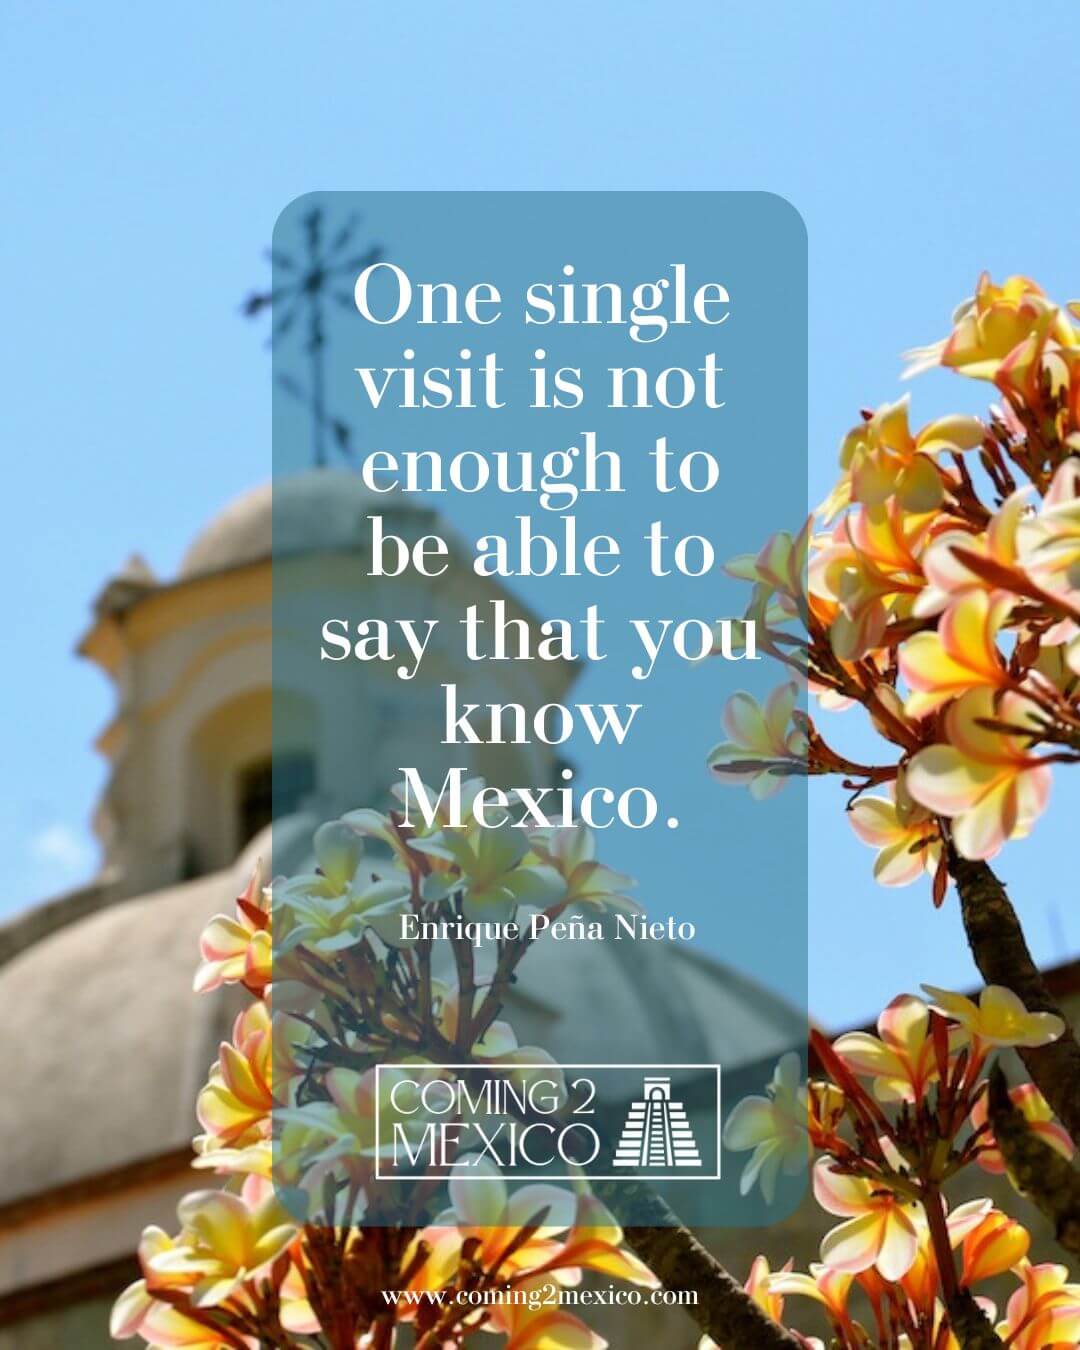 “One single visit is not enough to be able to say that you know Mexico.” - Enrique Peña Nieto